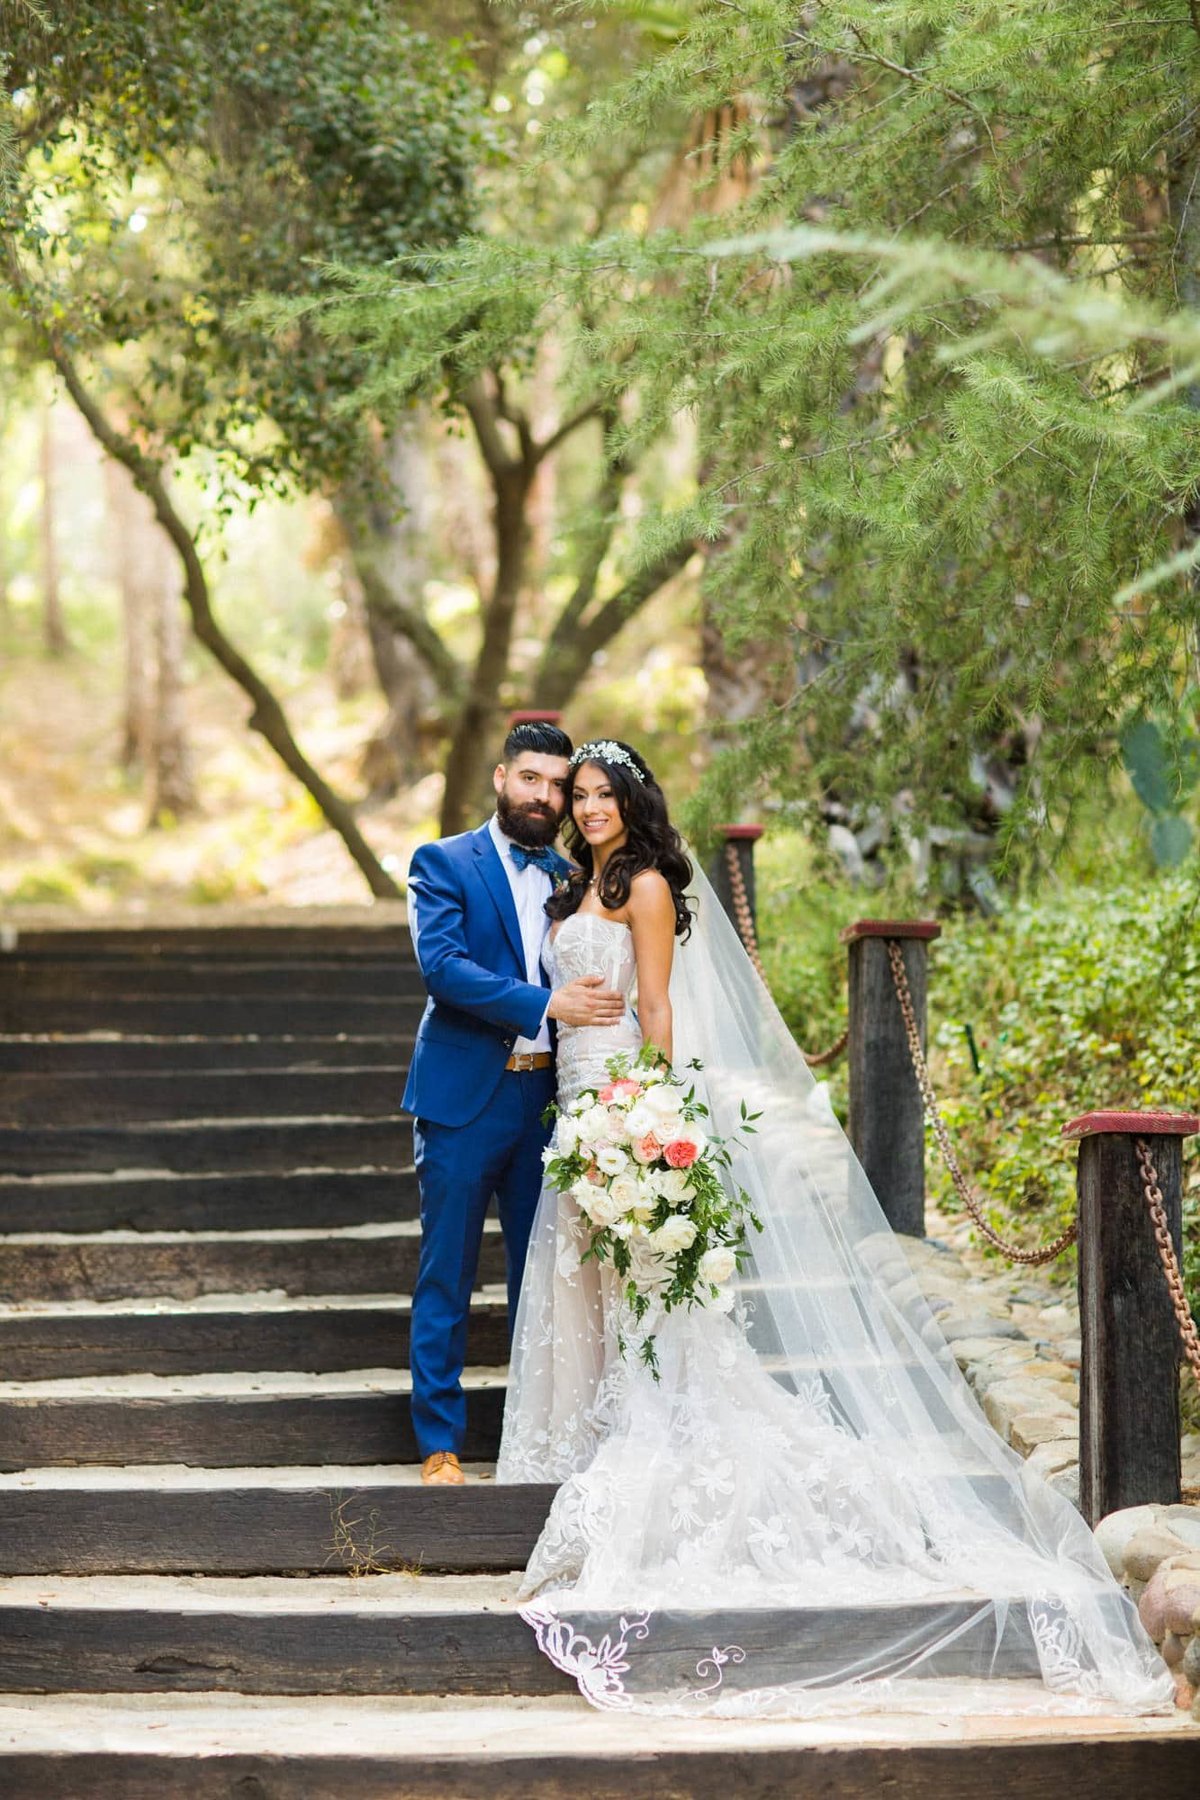 Bride and Groom pose together on an outdoor staircase with the Bride's veil fanned out